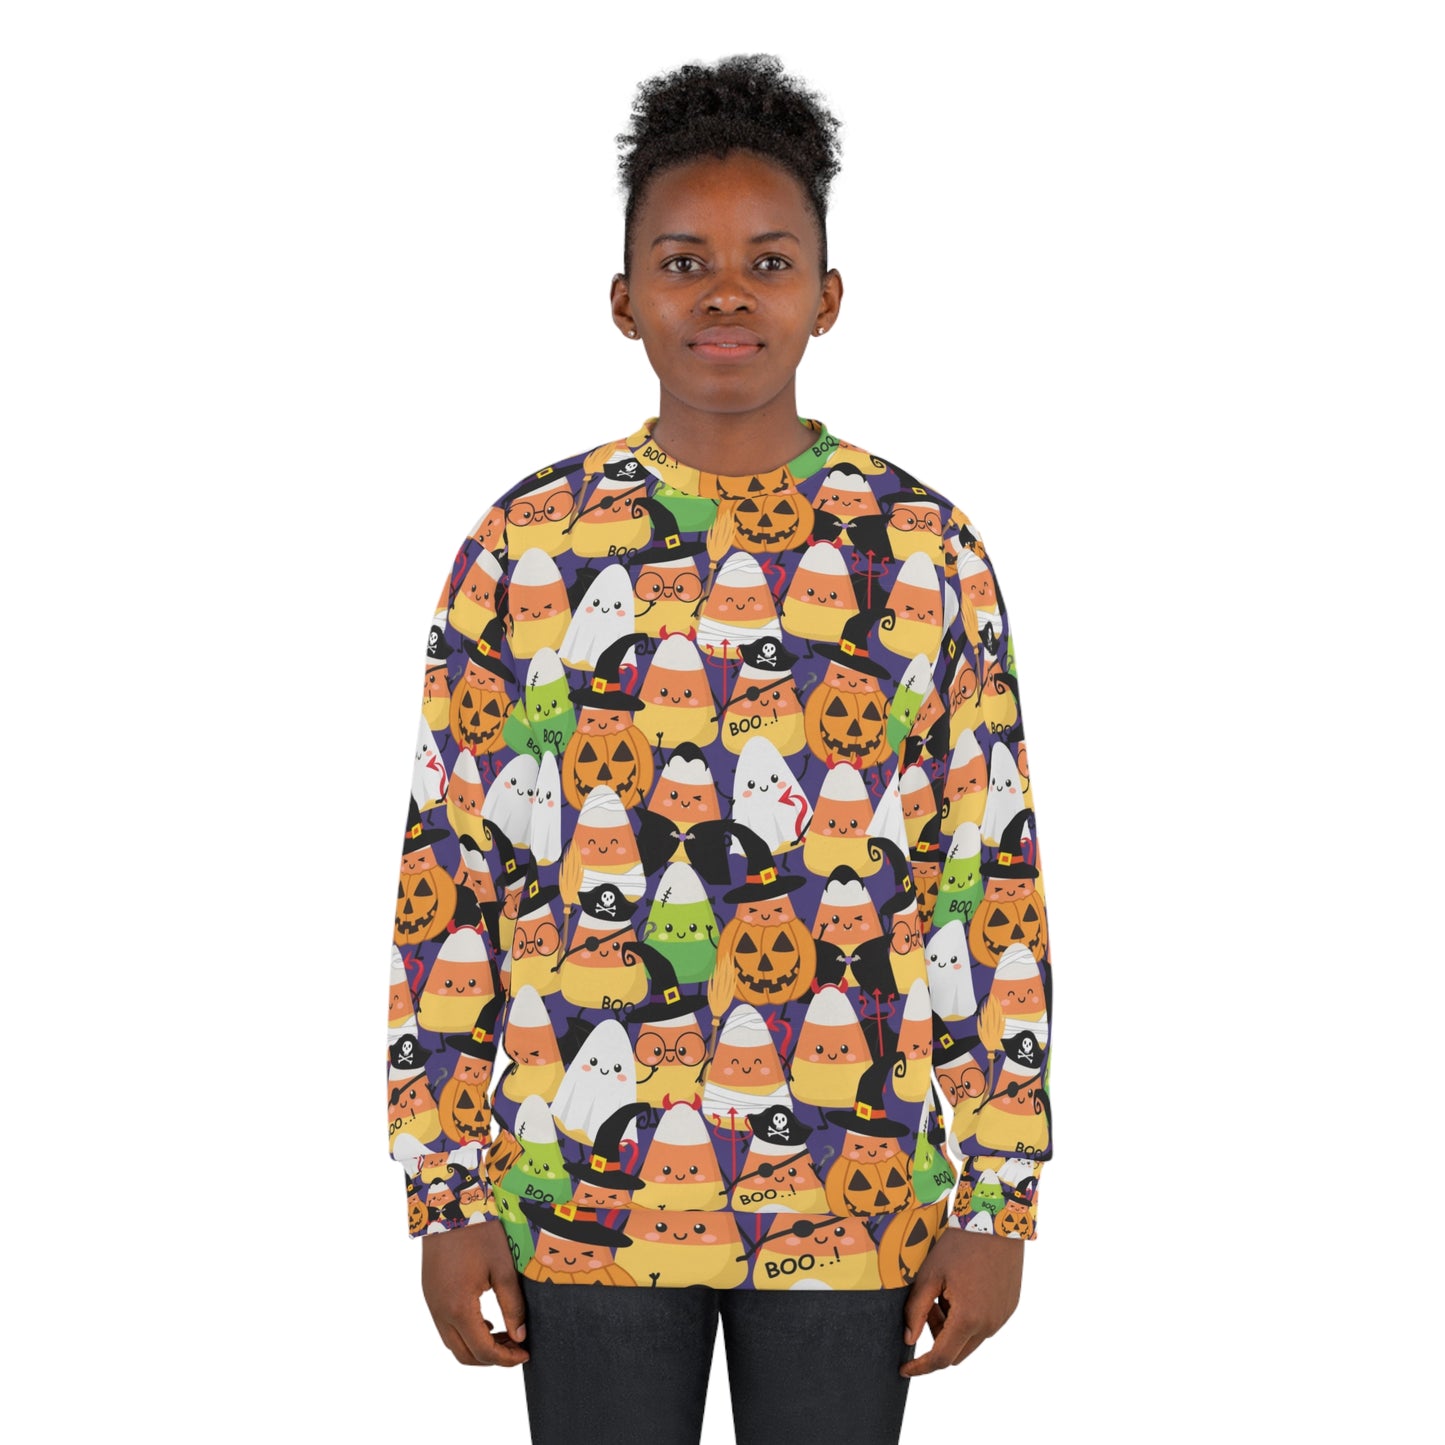 Cute candy corn with Halloween costumes Unisex Sweatshirt for Halloween lover and candy corn lover. LIMITED TIME.